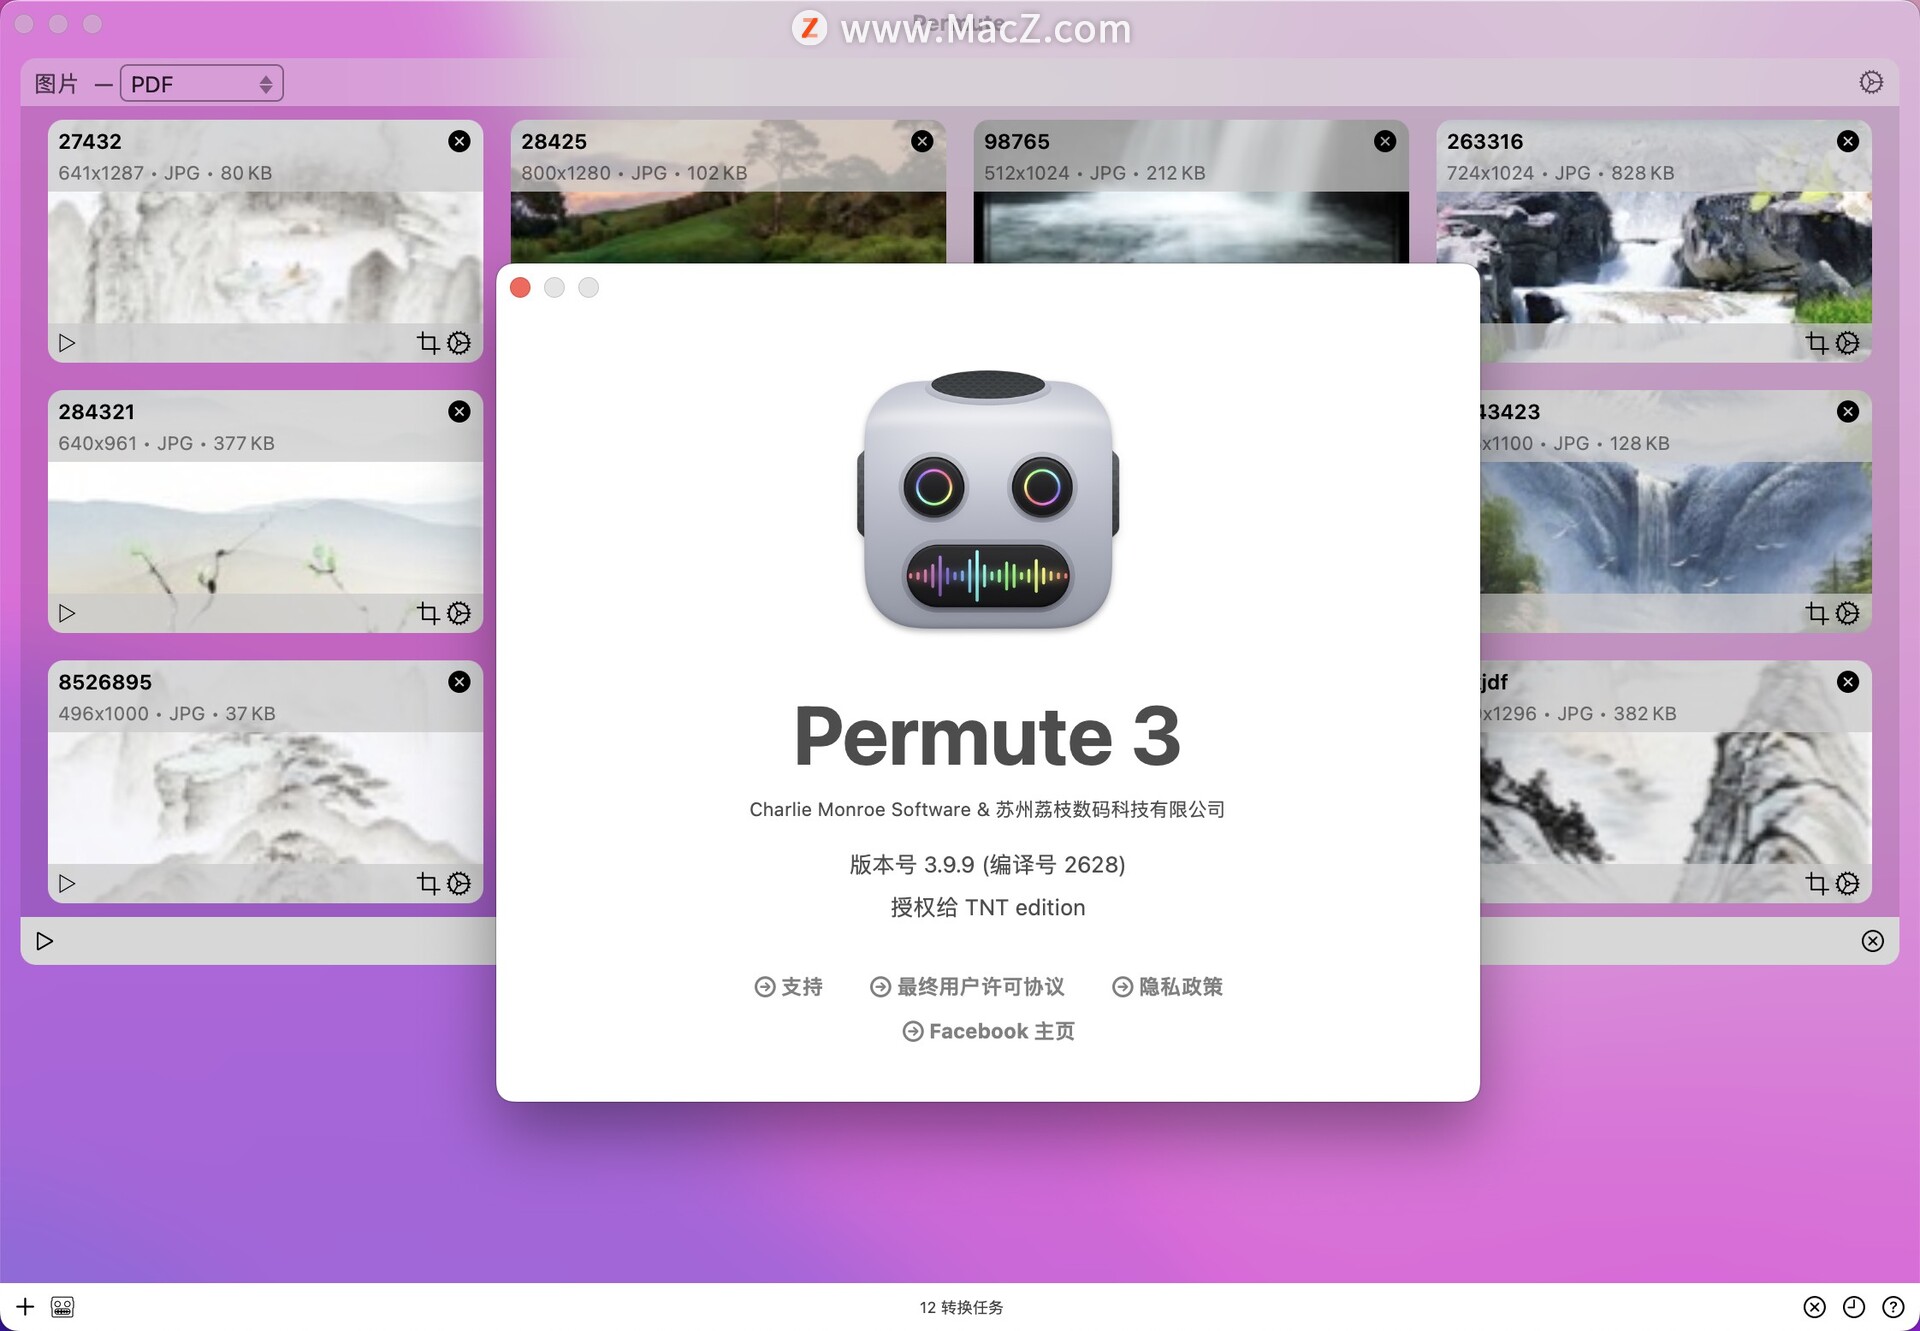 permute 3 cannot be opened because of a problem